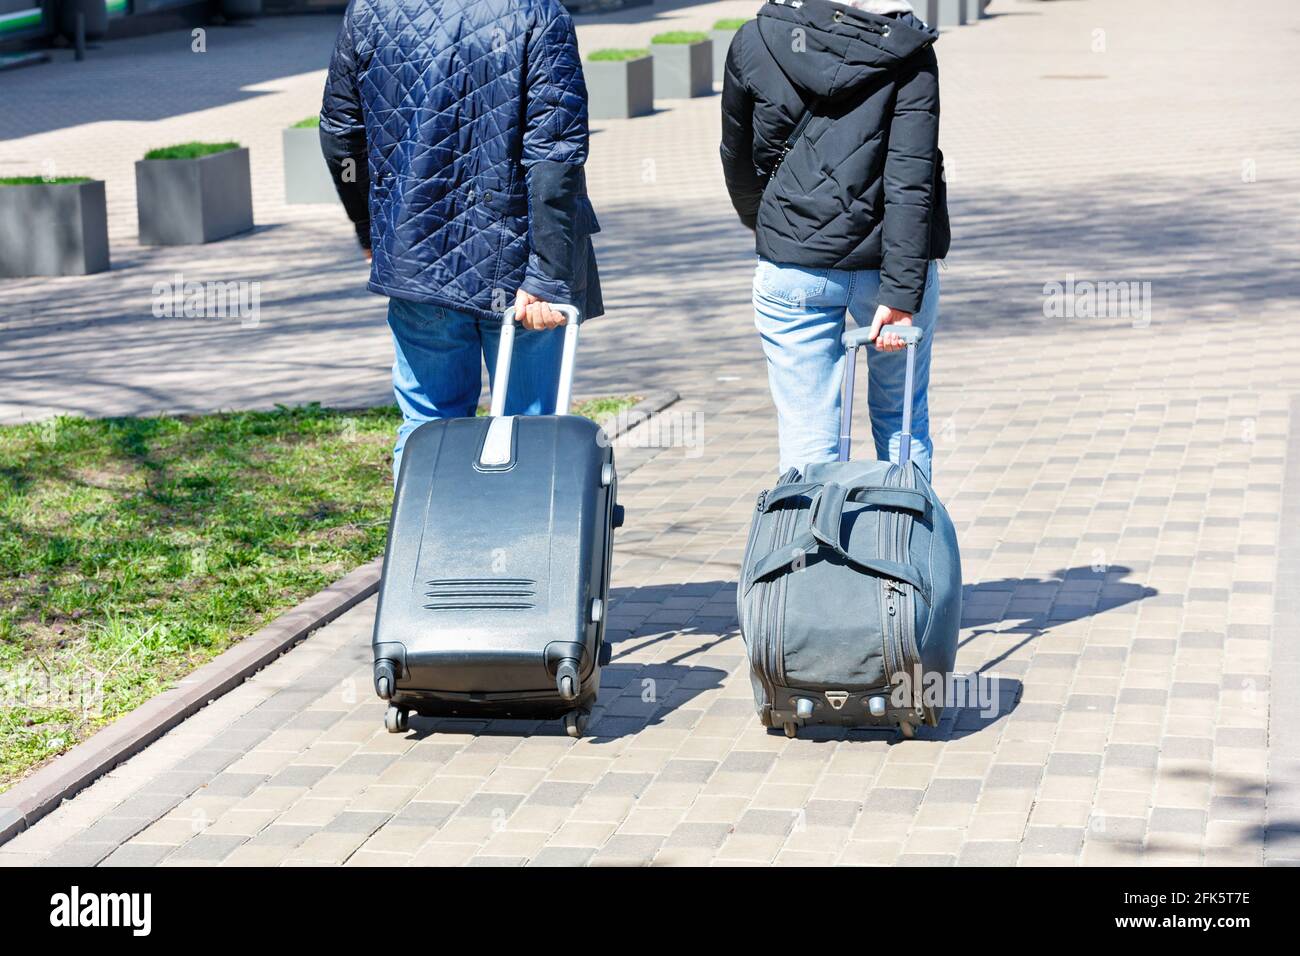 Two people, a man and a woman, walk along the cobbled sidewalk, carrying a  travel bag and a suitcase on wheels behind them Stock Photo - Alamy